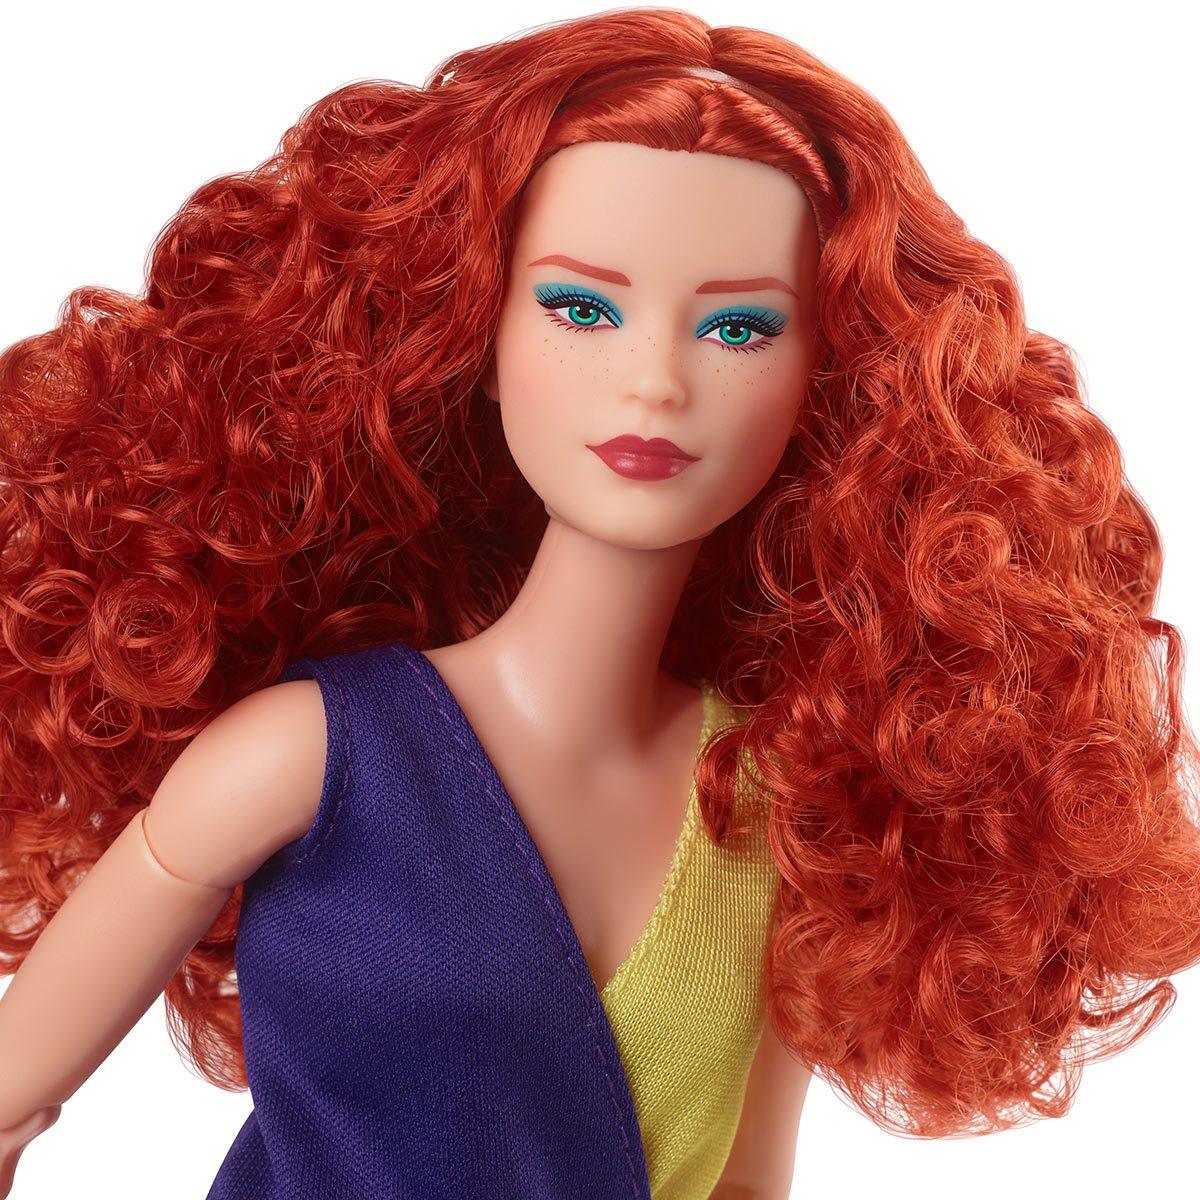 Barbie Looks Doll #13 with Red Hair Style and Pose, Fashion Collectibles - BumbleToys - 5-7 Years, Barbie, collectible, collectors, Fashion Dolls & Accessories, Girls, Pre-Order